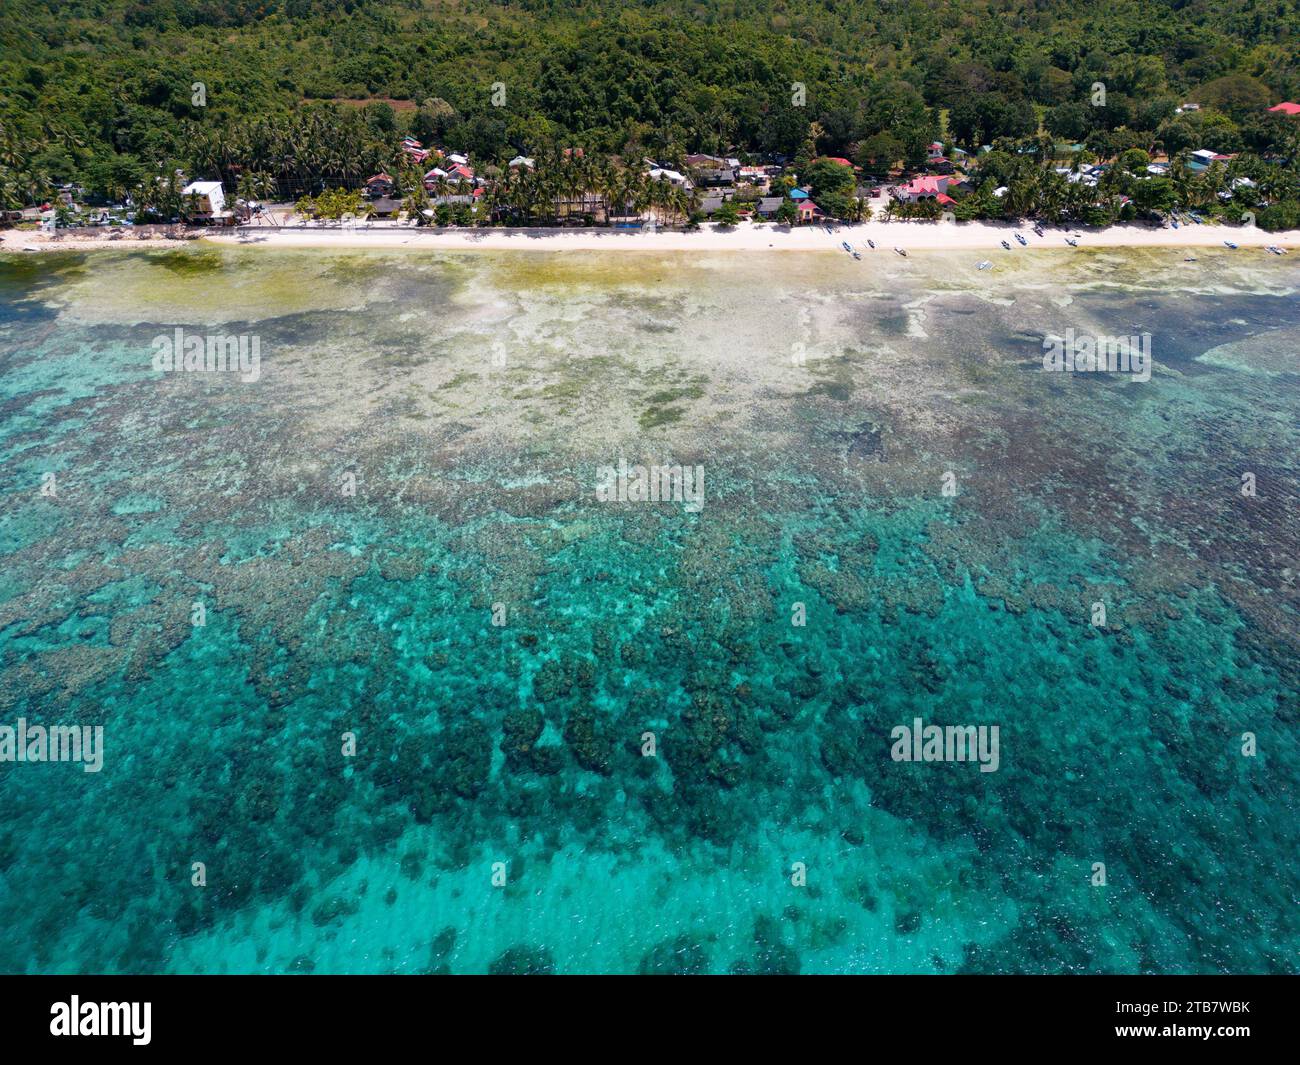 An idyllic beach scene with crystal-clear turquoise waters of Maite Marine Sanctuary, Siquijor, Philippines Stock Photo